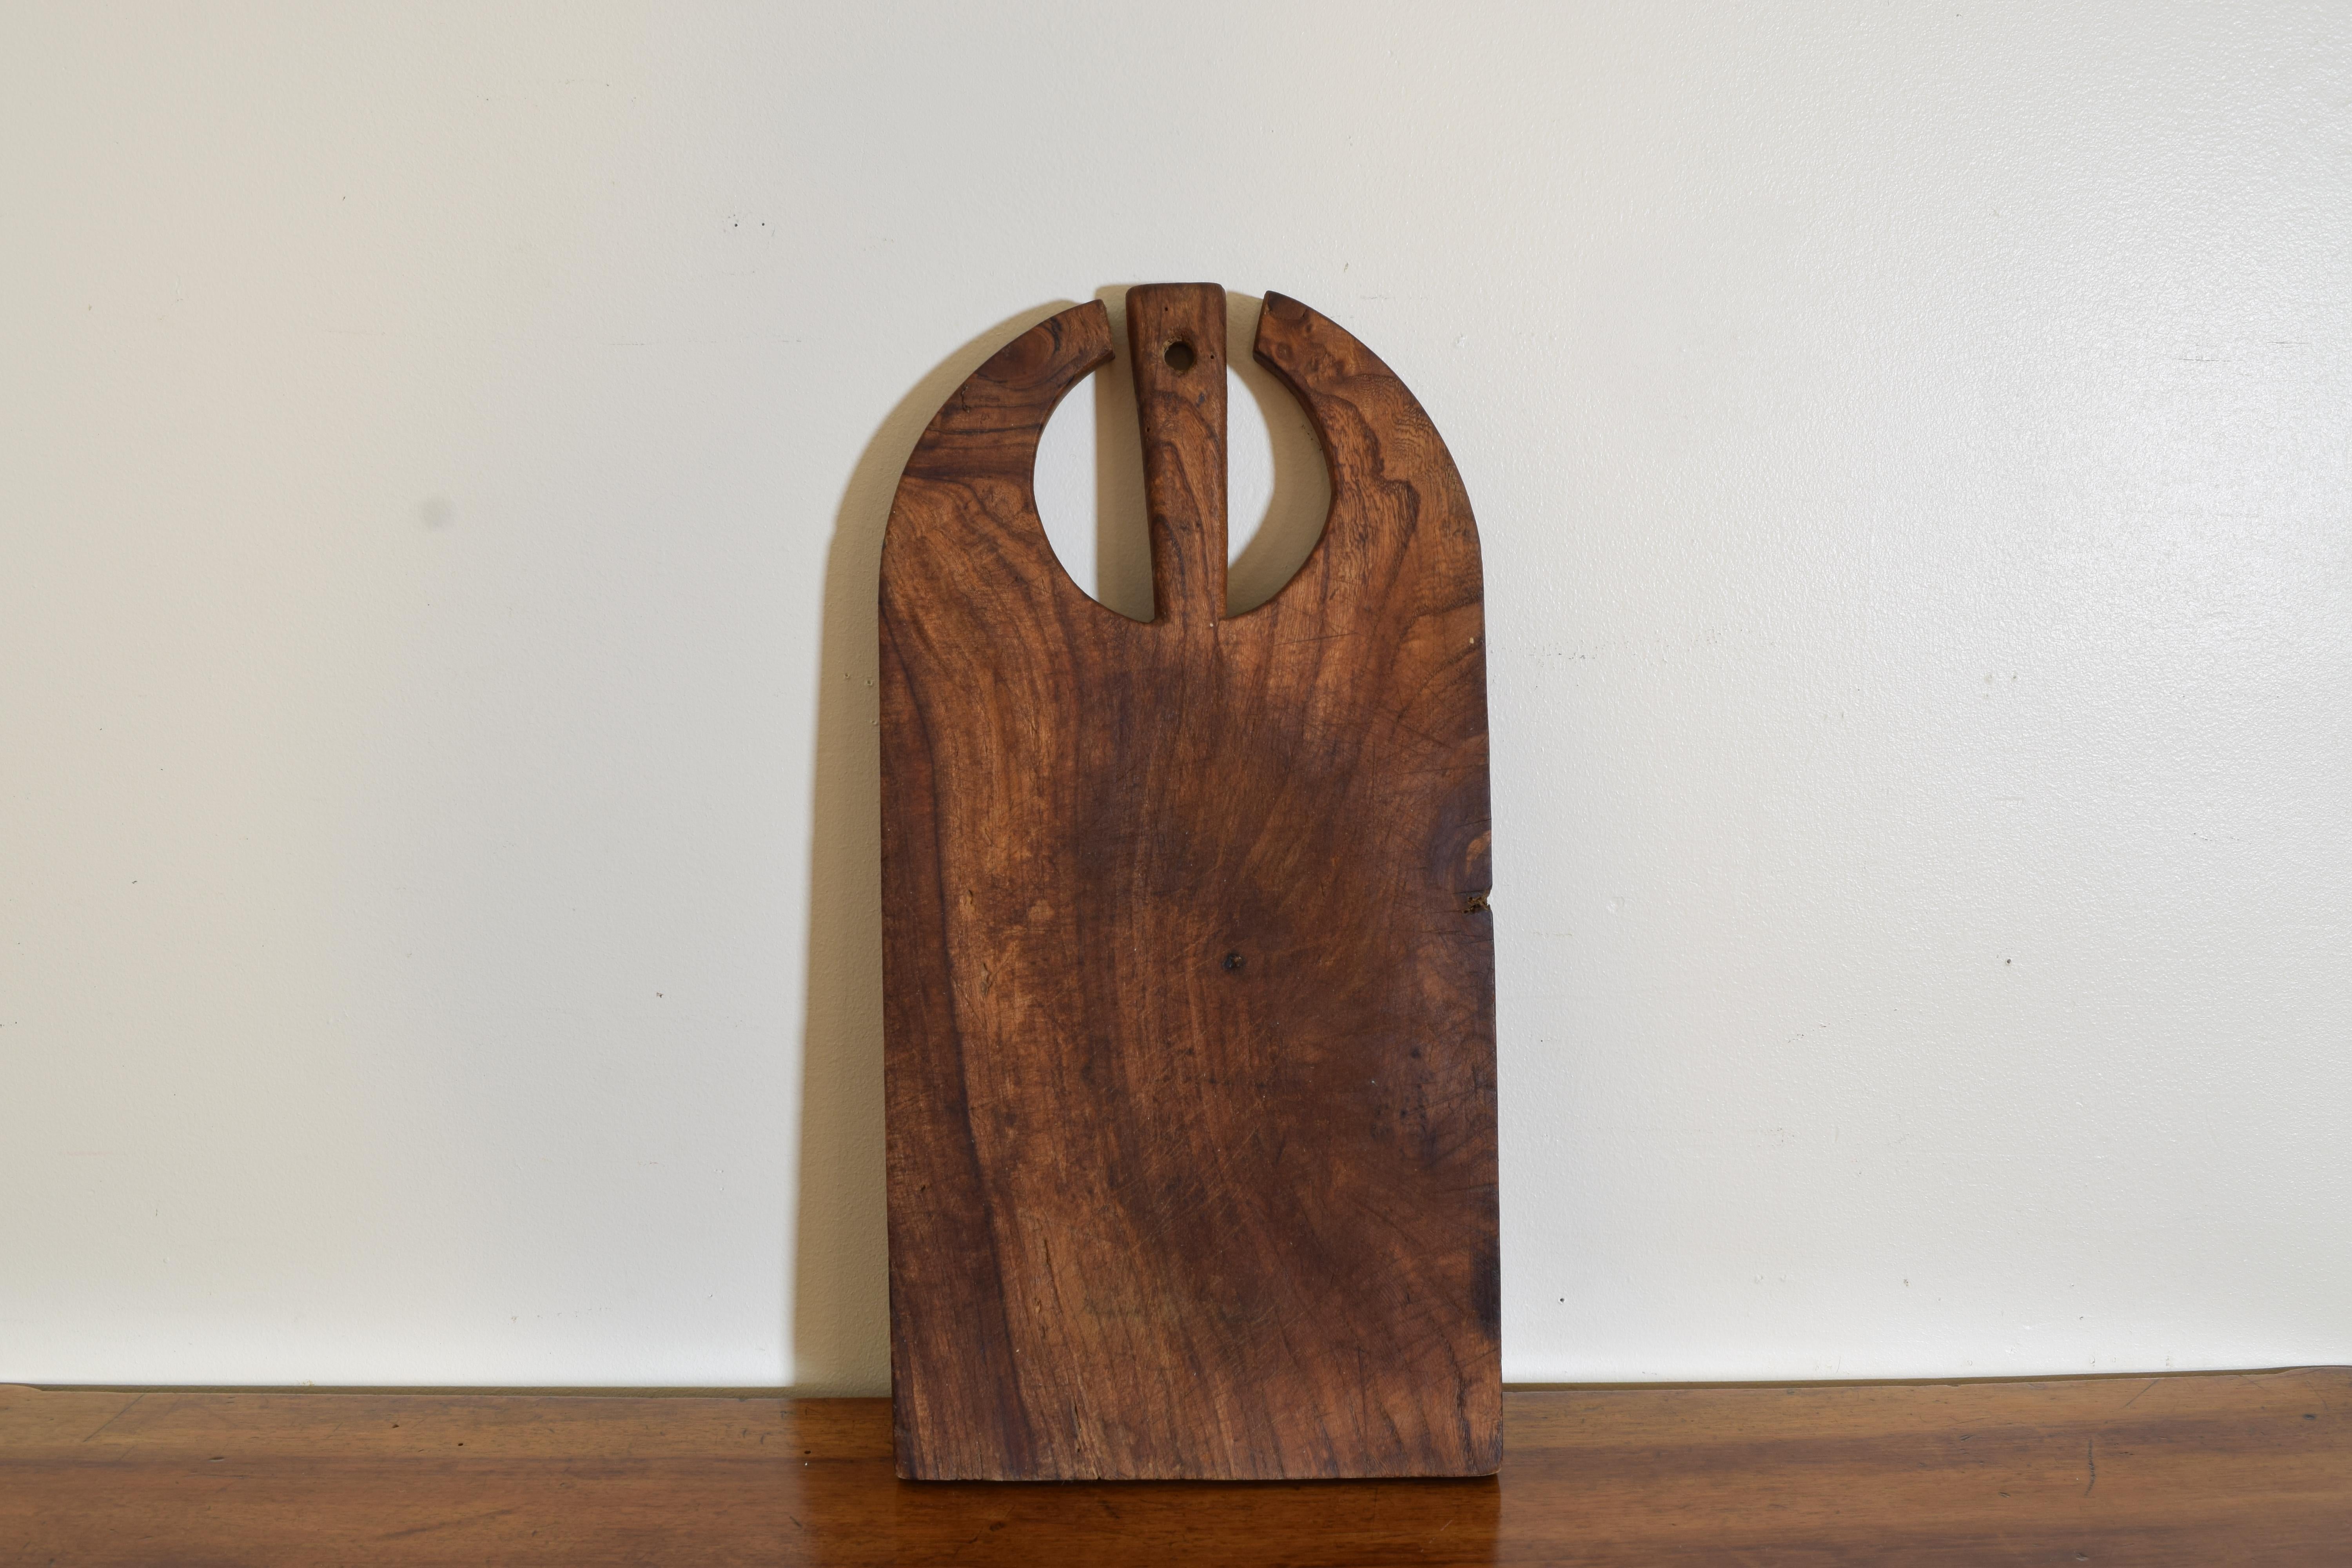 An unusually shaped cutting board with handle